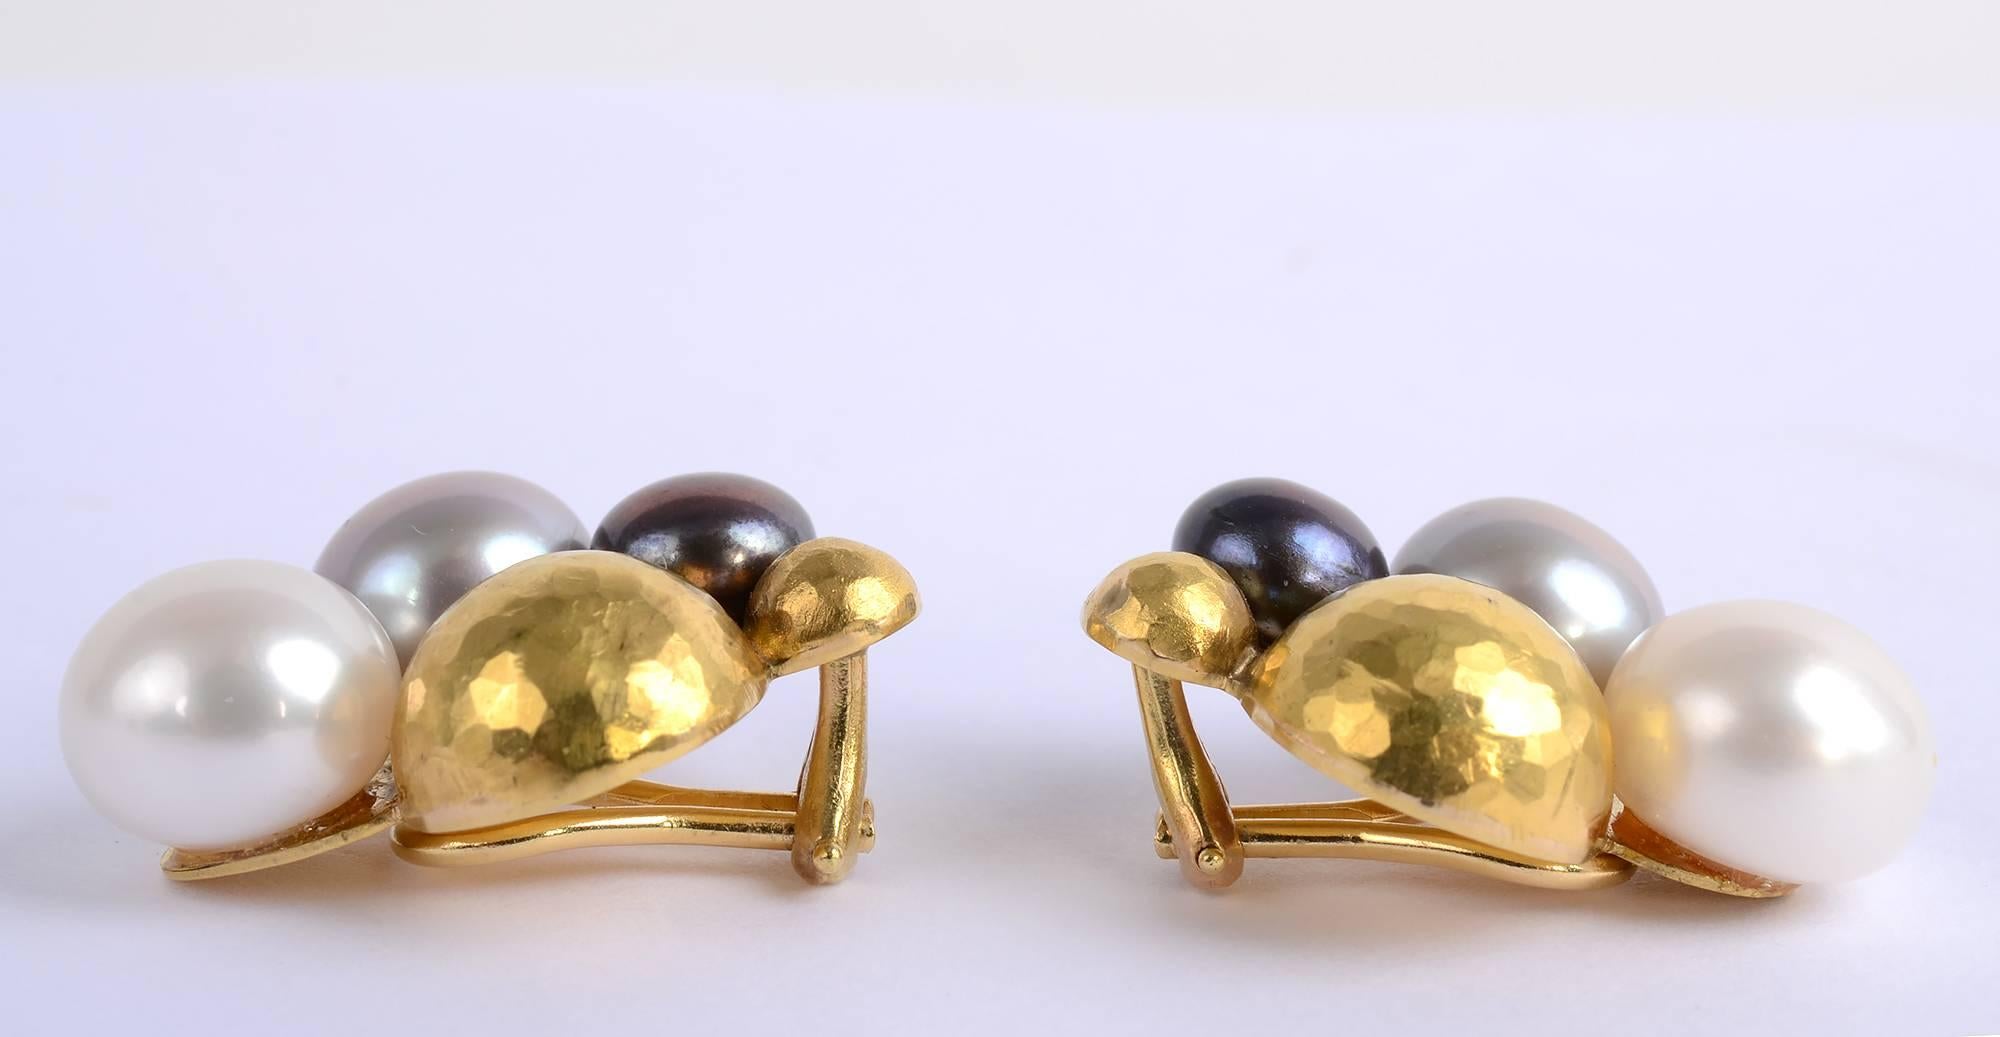 Handmade earrings with black, white and gray pearls and hammered gold balls. The white pearl, which is the largest, is approximately 11 mm.  The dyed black pearl is the smallest, measuring 7.6 mm.
Made of 18 karat gold. Clip backs can be converted